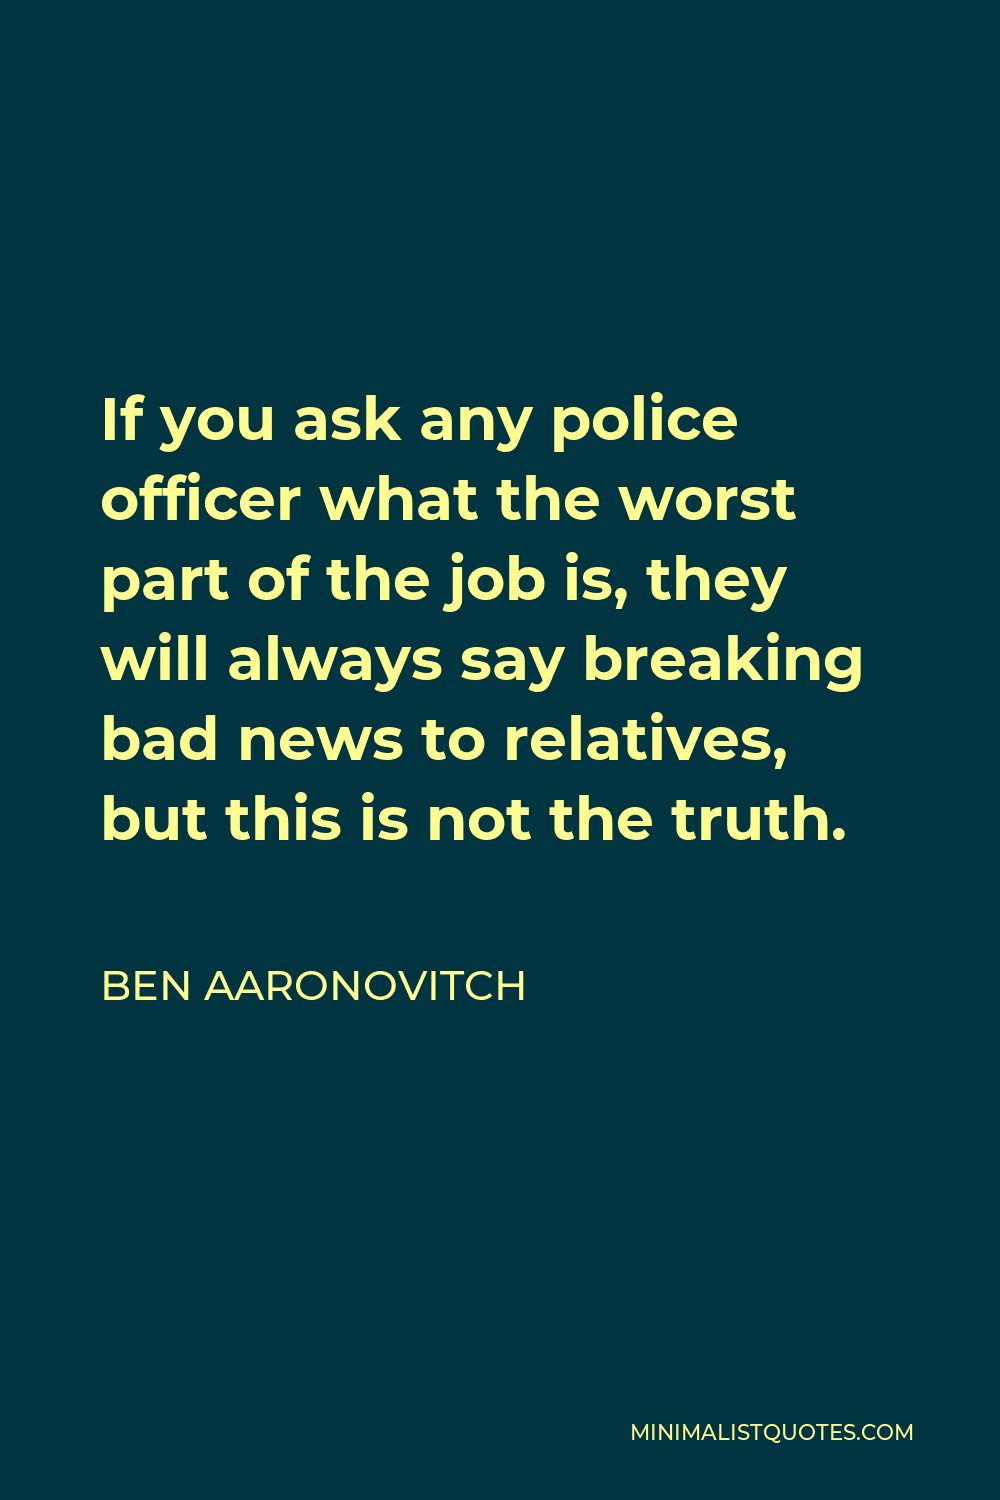 Ben Aaronovitch Quote - If you ask any police officer what the worst part of the job is, they will always say breaking bad news to relatives, but this is not the truth.